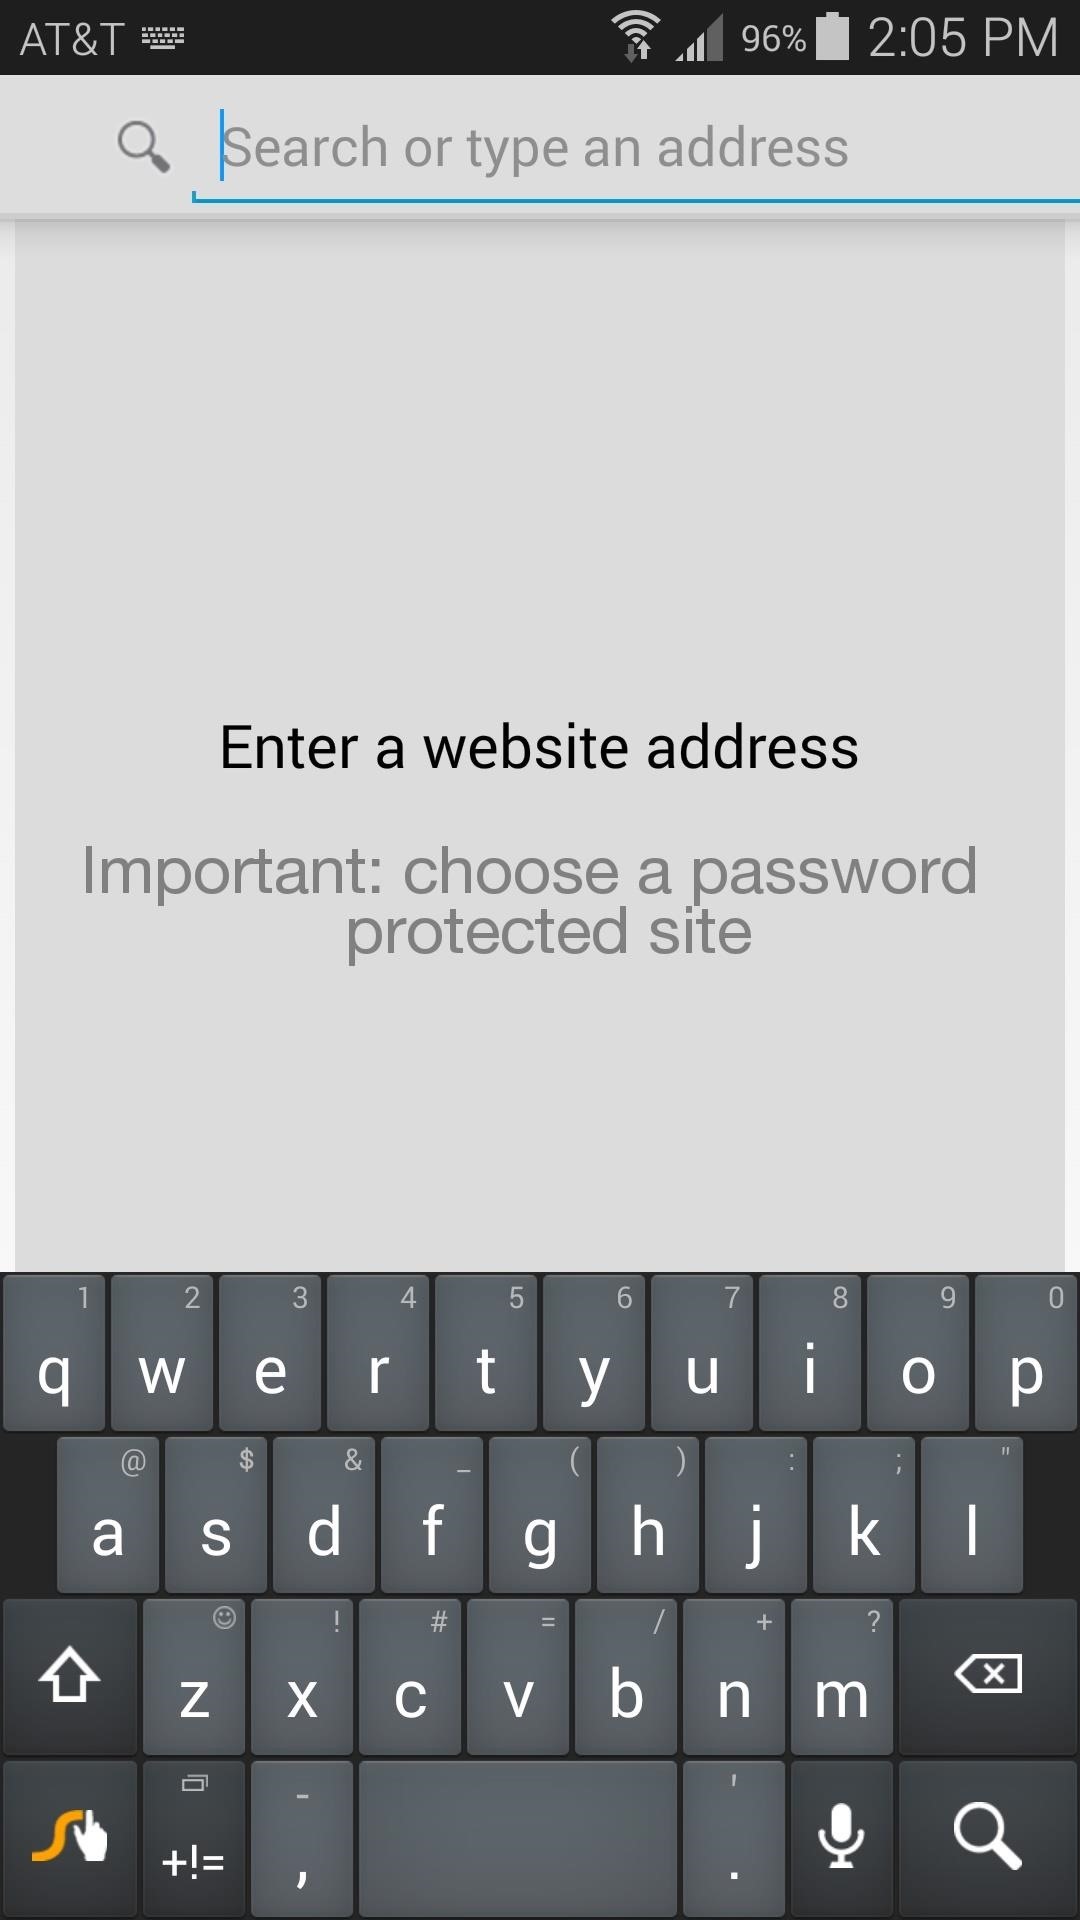 One-Tap, Hassle-Free Logins: Automate the Sign-In Process for Your Favorite Websites on Android